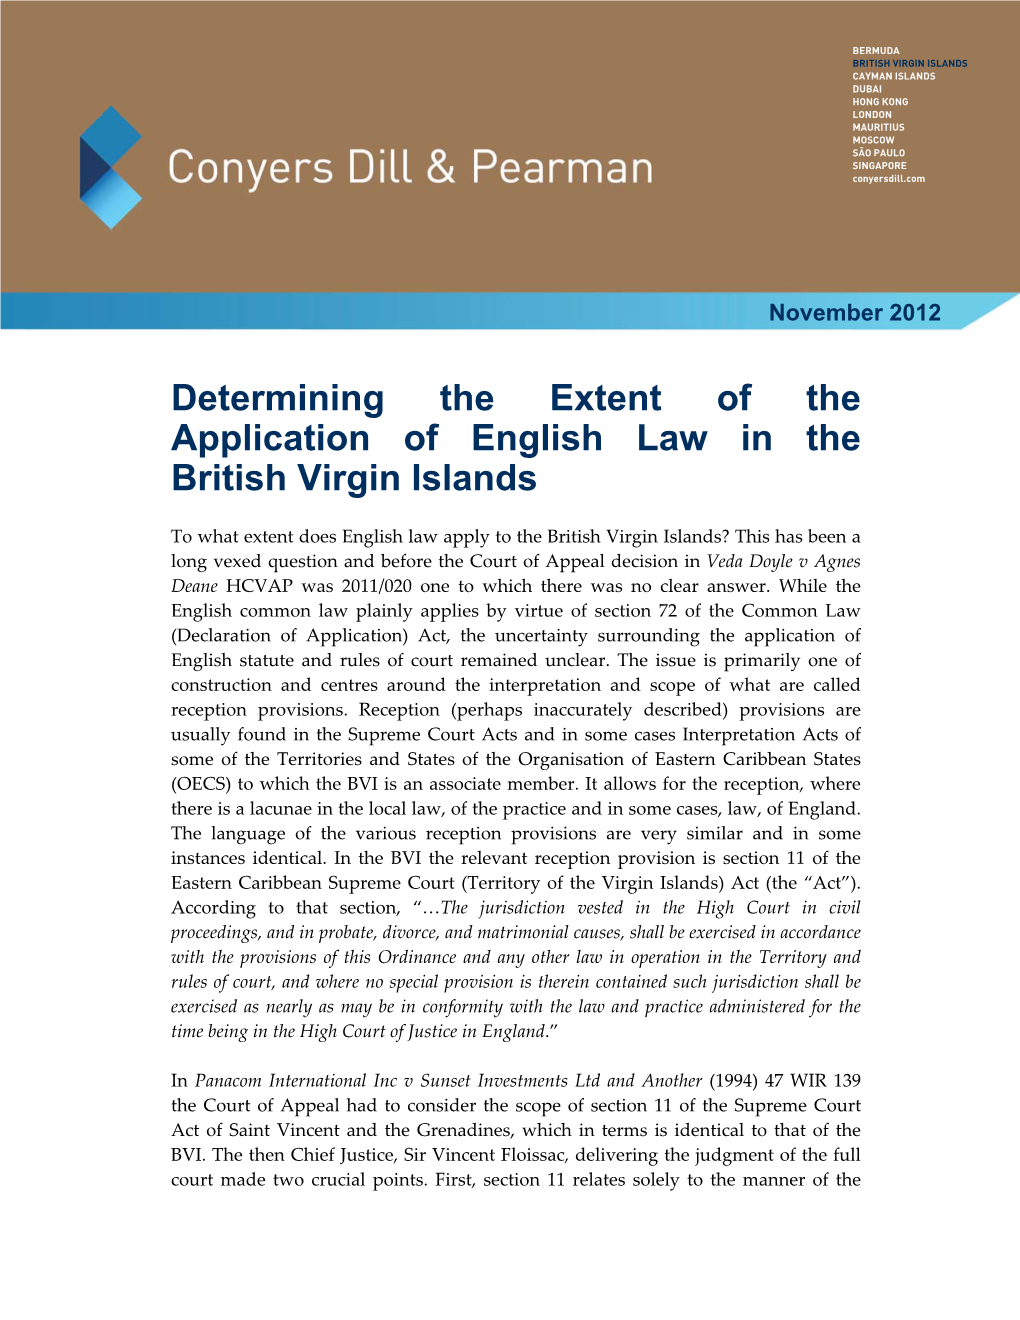 Determining the Extent of the Application of English Law in the British Virgin Islands